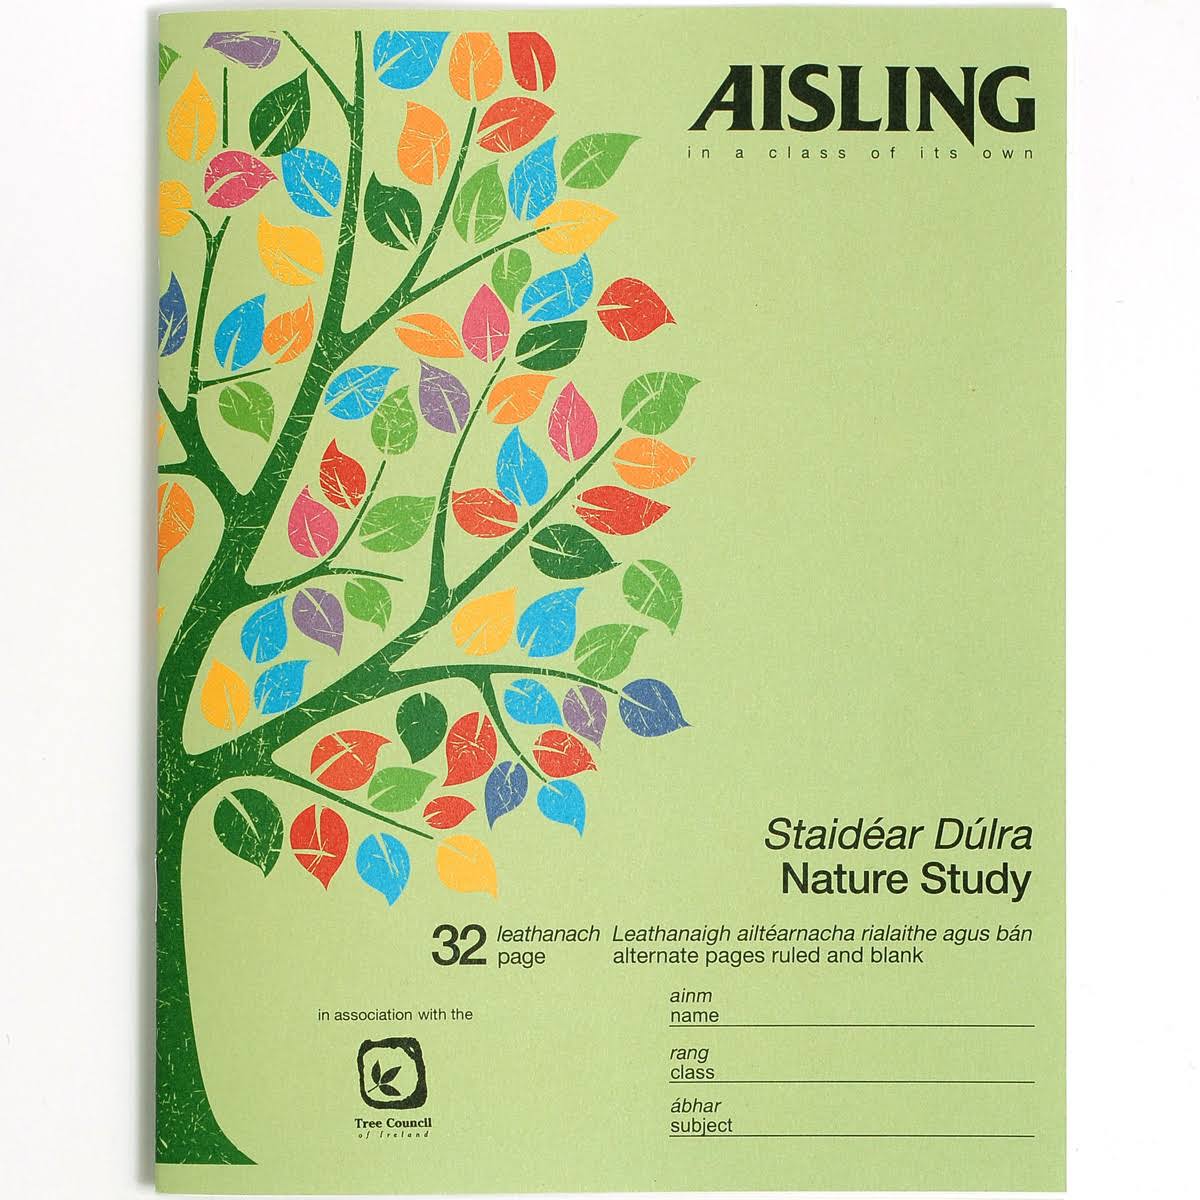 Aisling 9 x 7 Nature Study Book 32 Page, F8/B